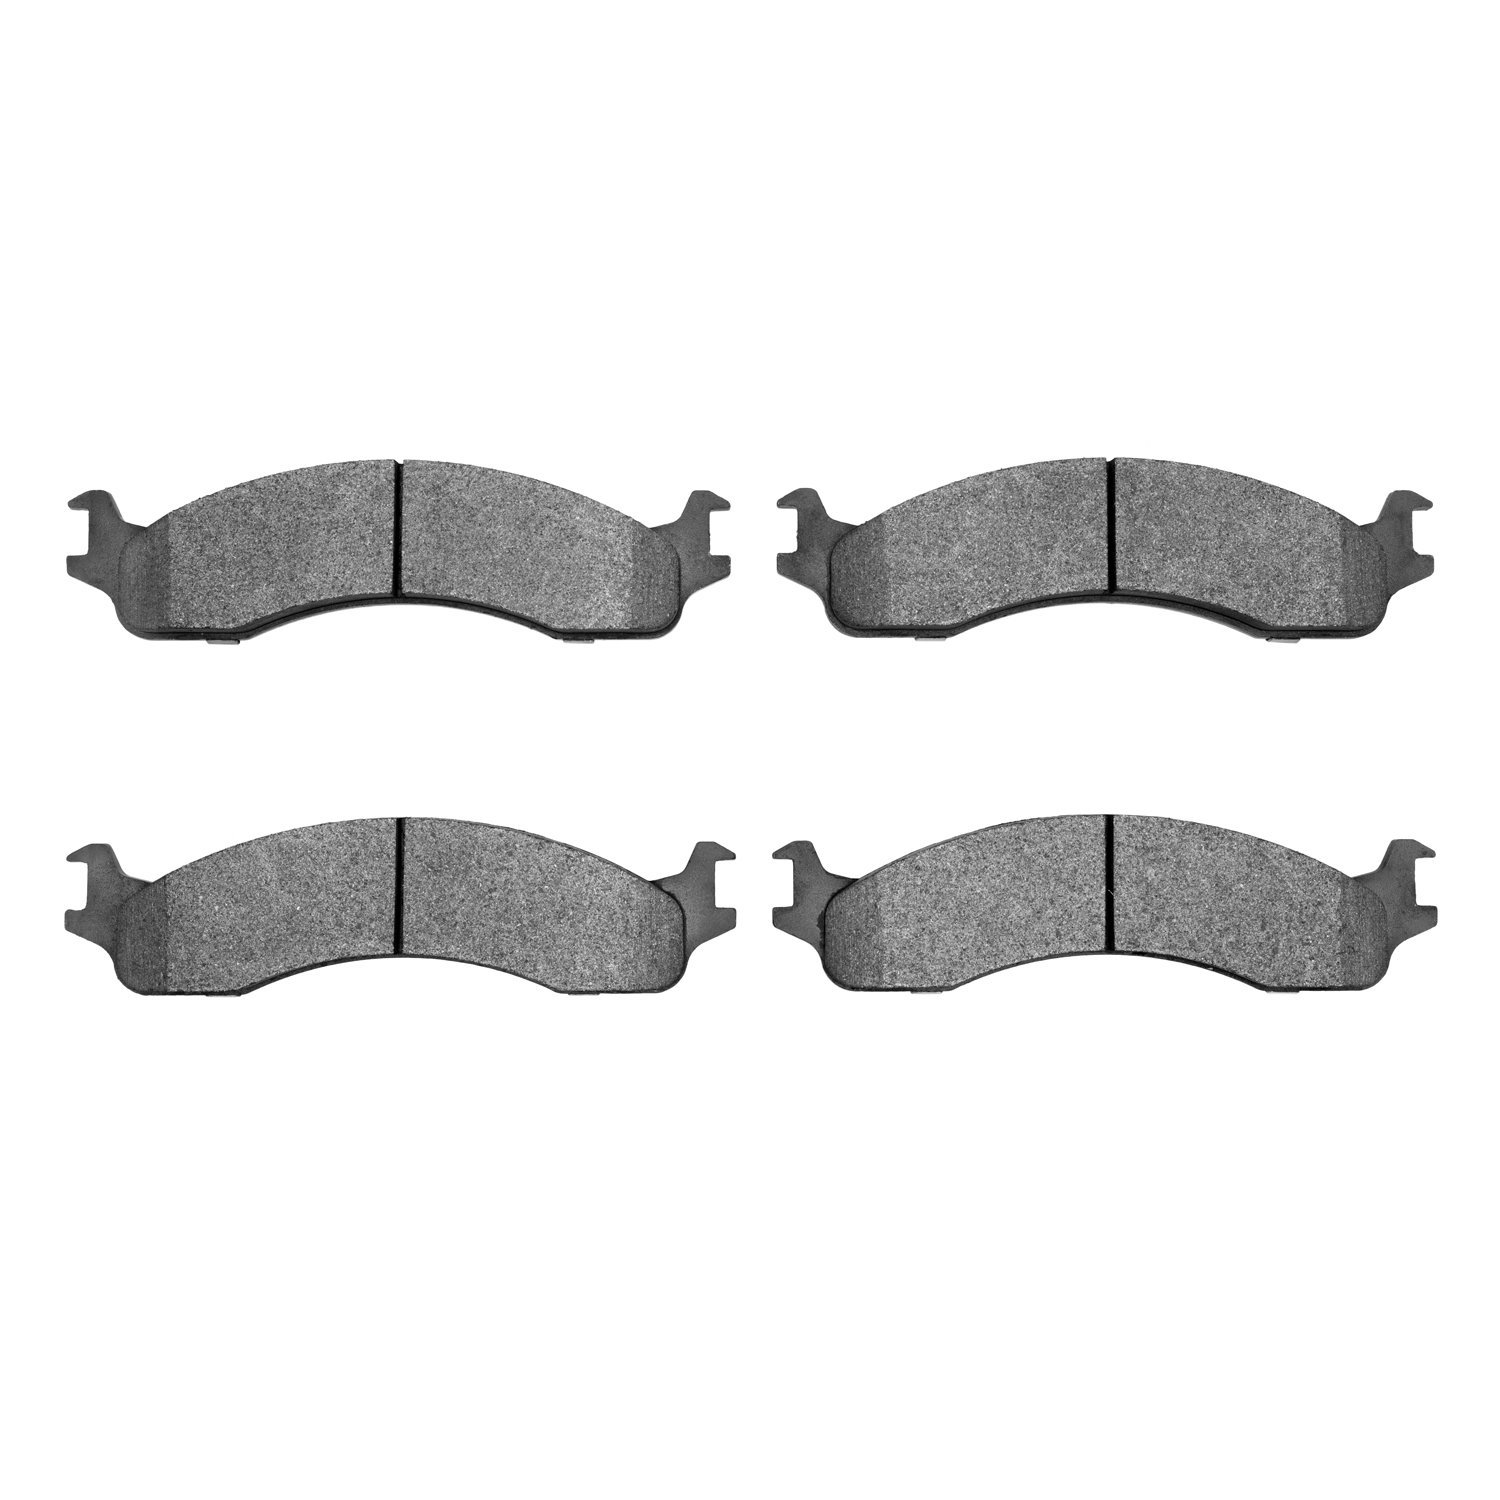 Super-Duty Brake Pads, 1995-2007 Ford/Lincoln/Mercury/Mazda, Position: Front